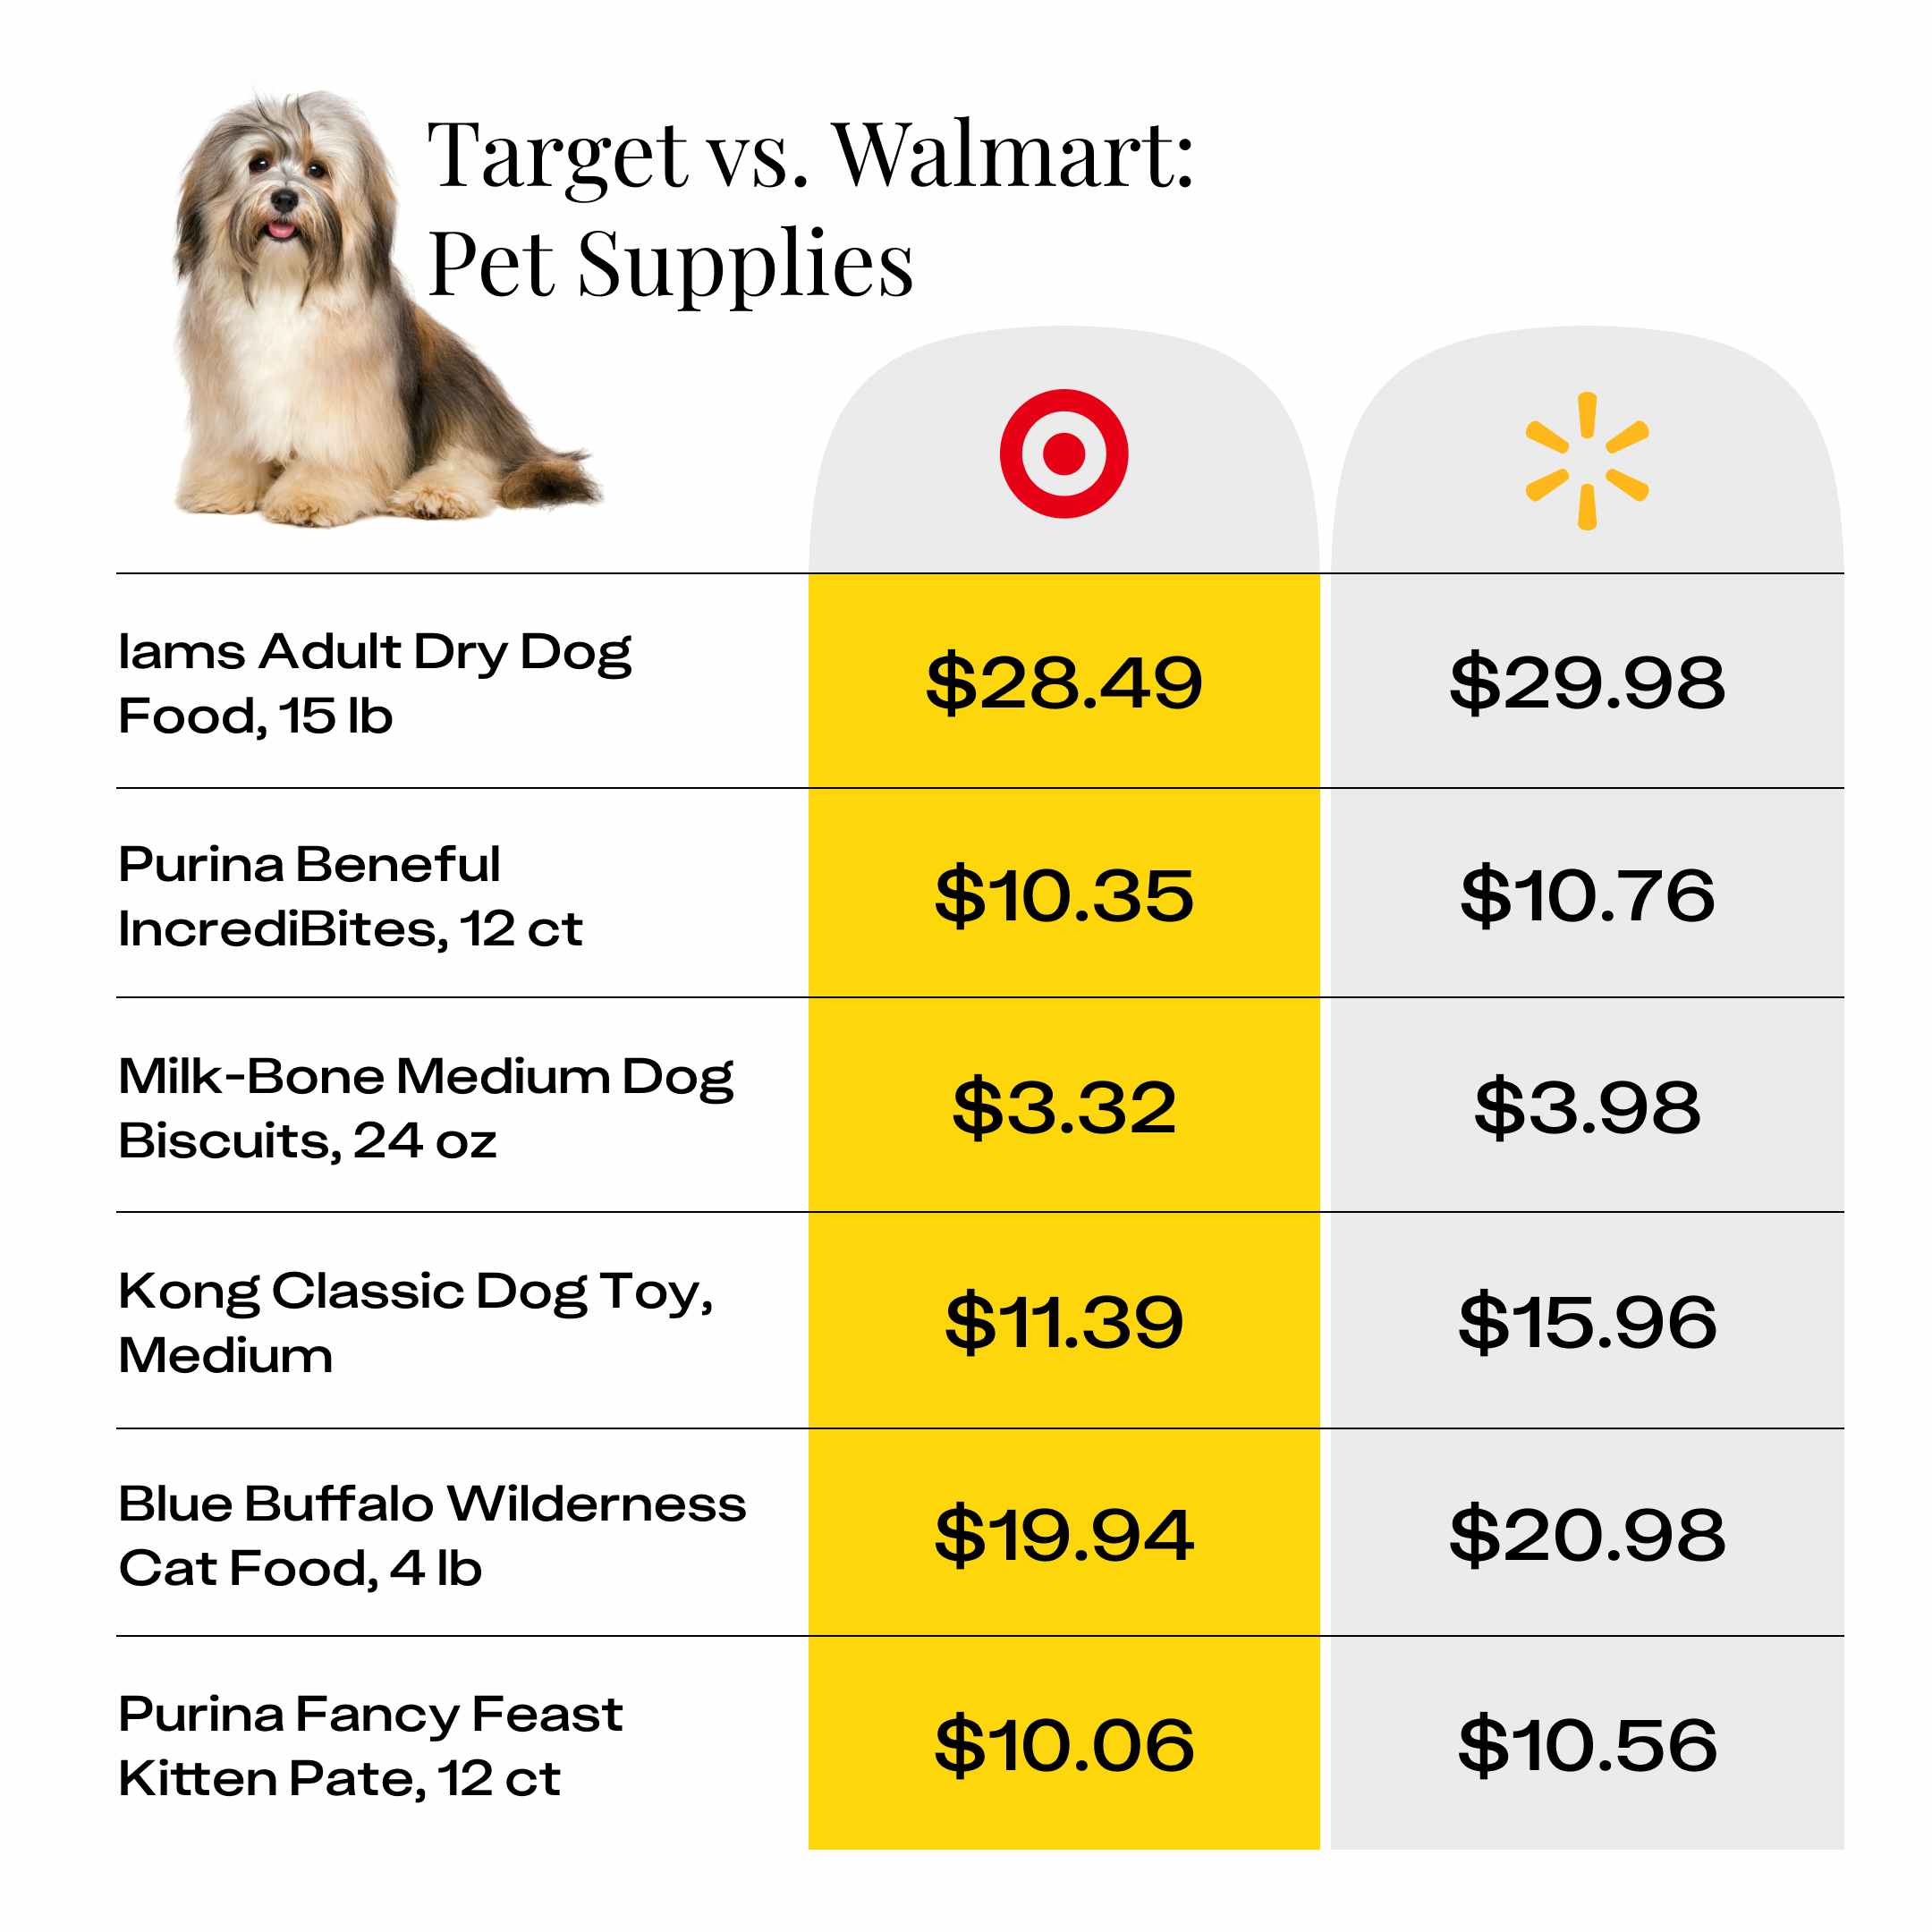 price comparison for pet supplies at Target and Walmart